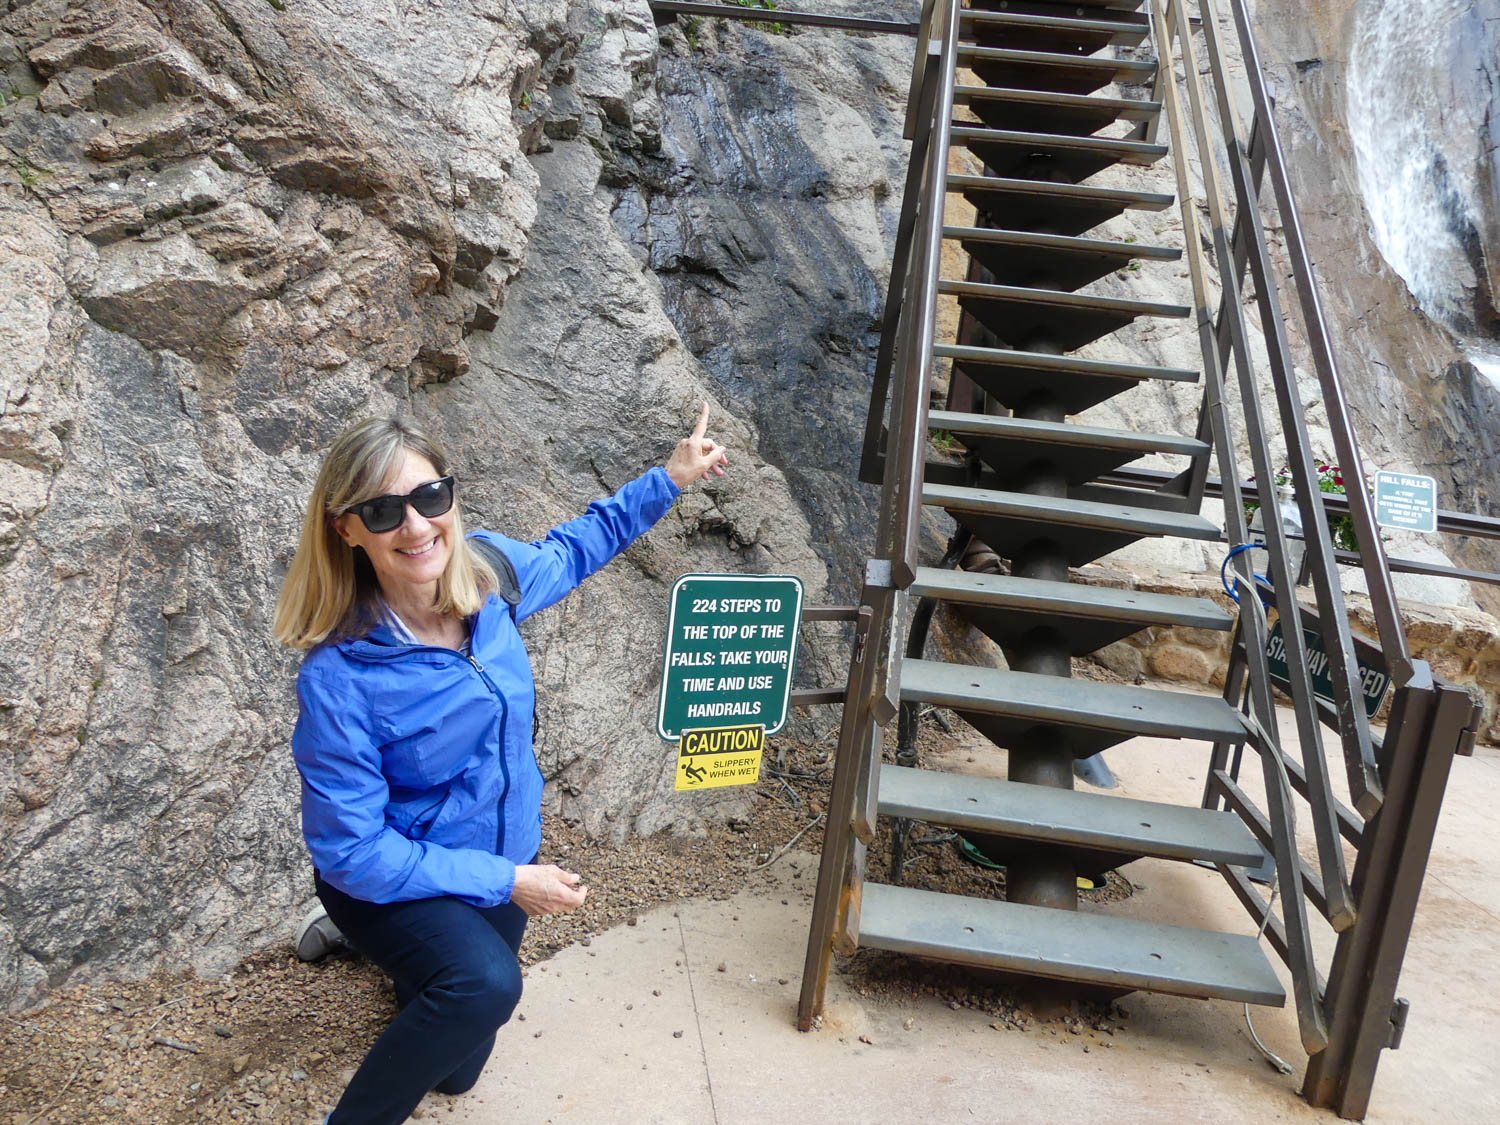 Author Sherry Spitsnaugle gets ready to climb the steps at Broadmoor Seven Falls during a weekend in Colorado Springs.